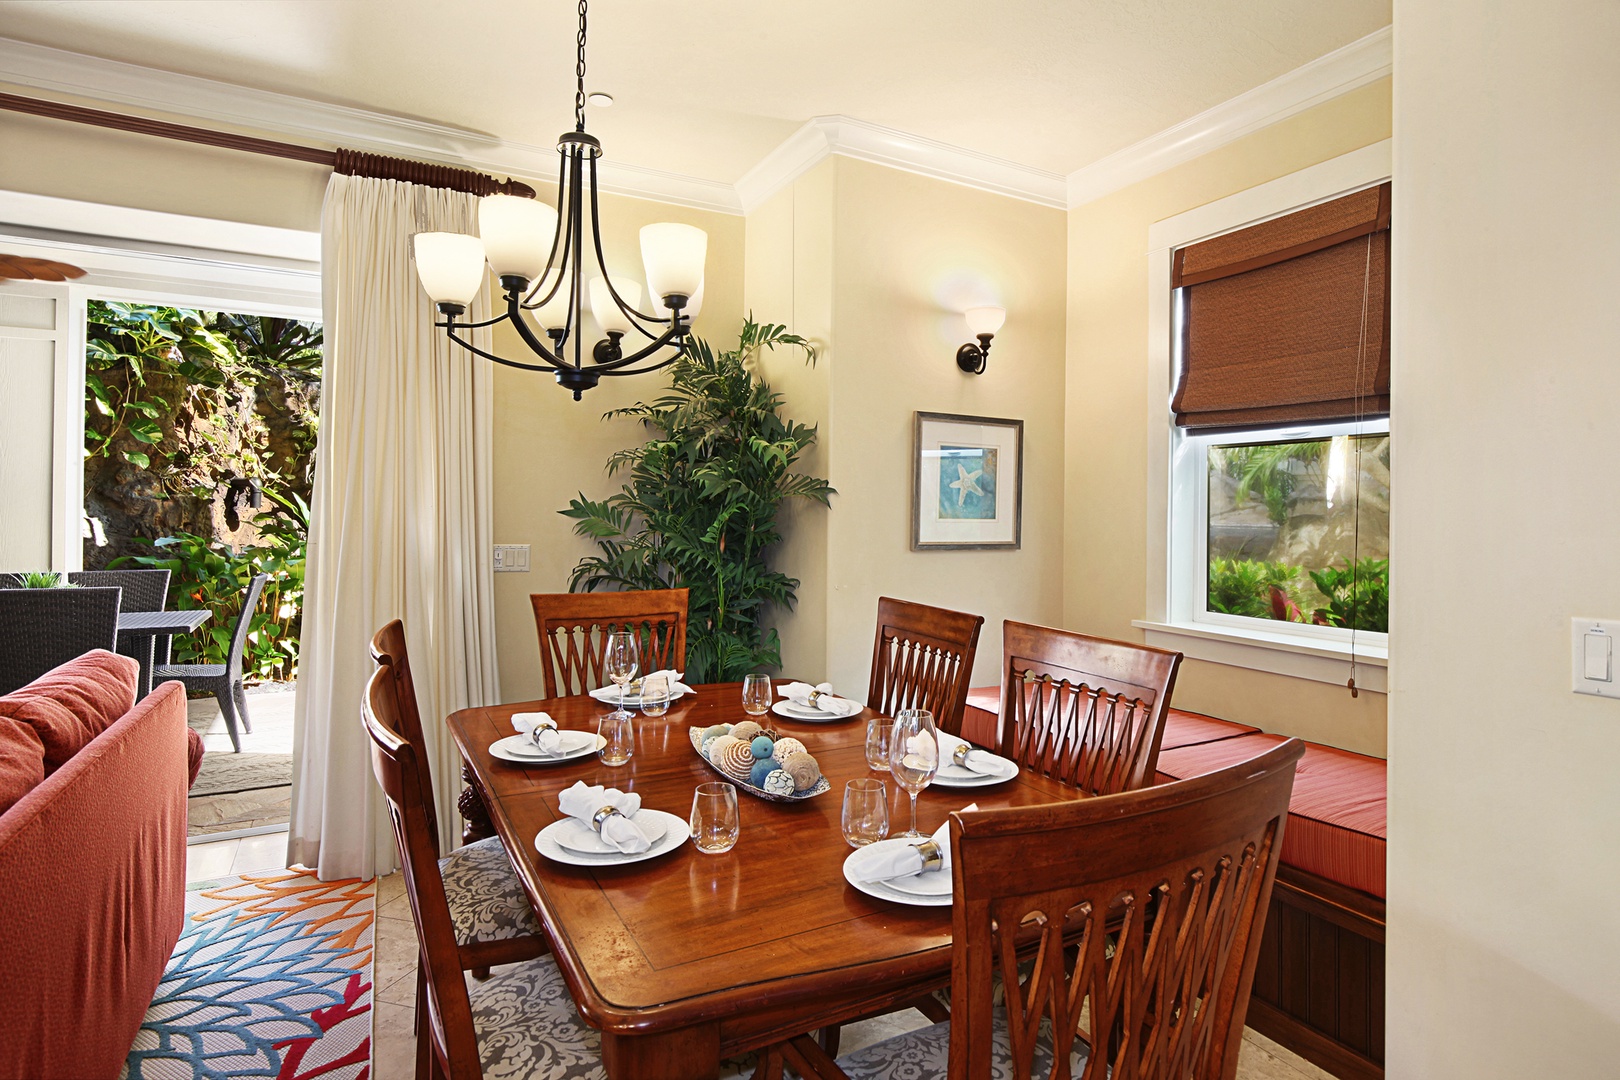 Koloa Vacation Rentals, Villas at Poipu Kai B111 - A fully appointed kitchen with fine finishes offers bar seating, with a more formal dining area for six just beyond